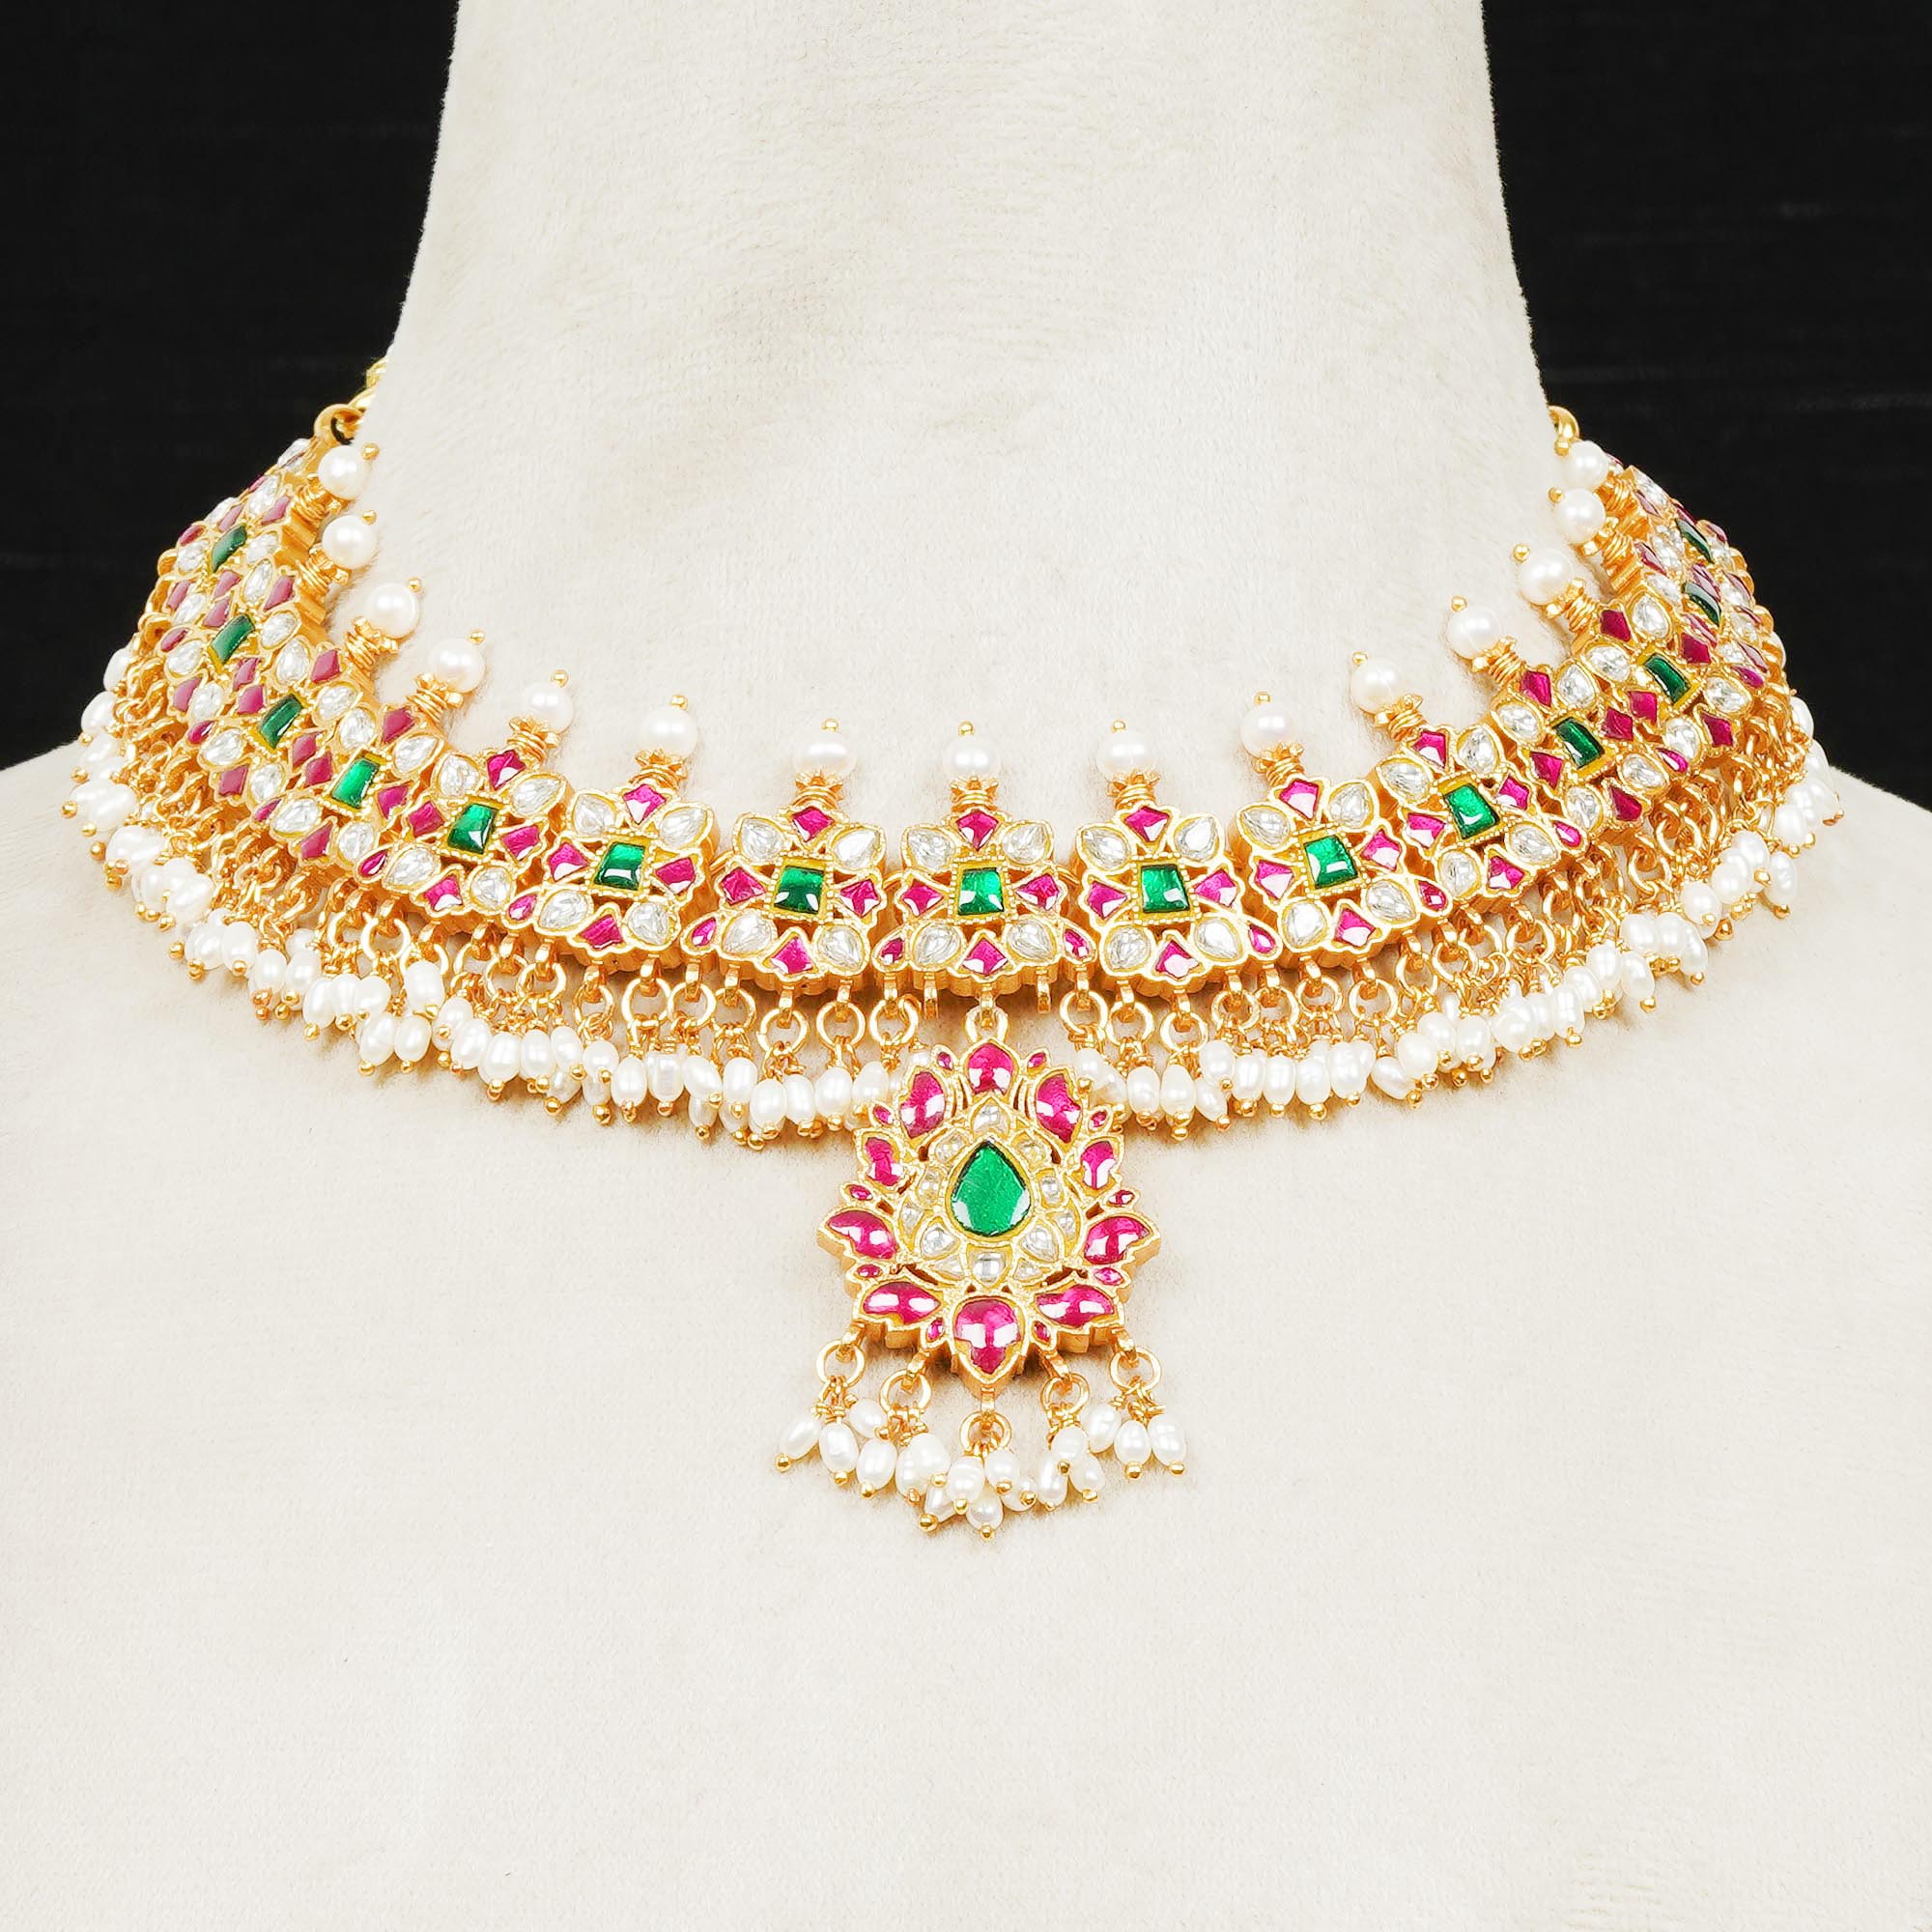 Finely Pearl and Stone Embellished Indian Necklace with 22k Gold Plating